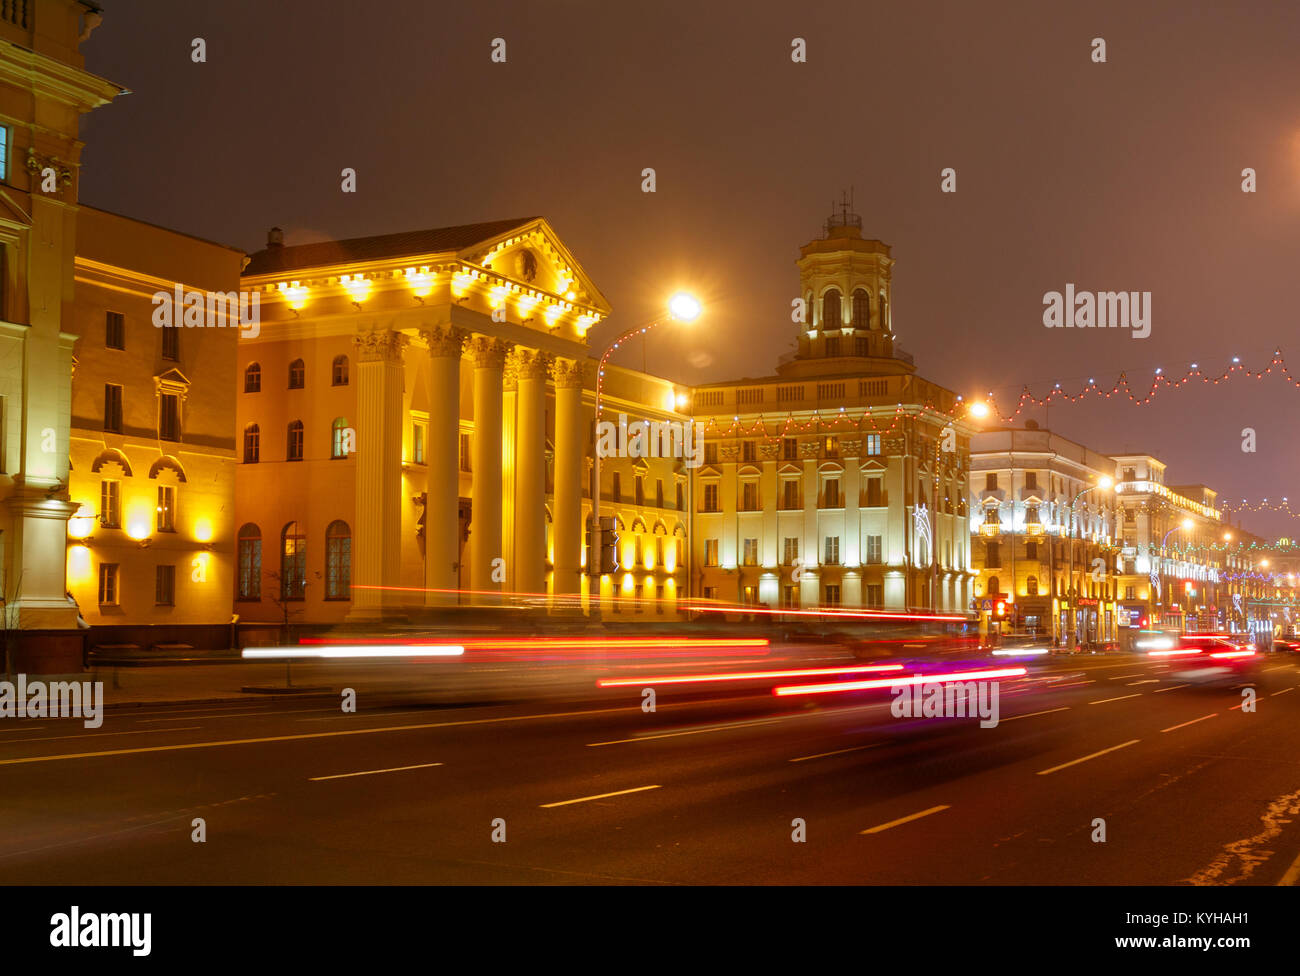 Illuminated headquarters of the State Security Committee of the Republic of Belarus, the Belarussian KGB. Minsk, Belarus. Stock Photo